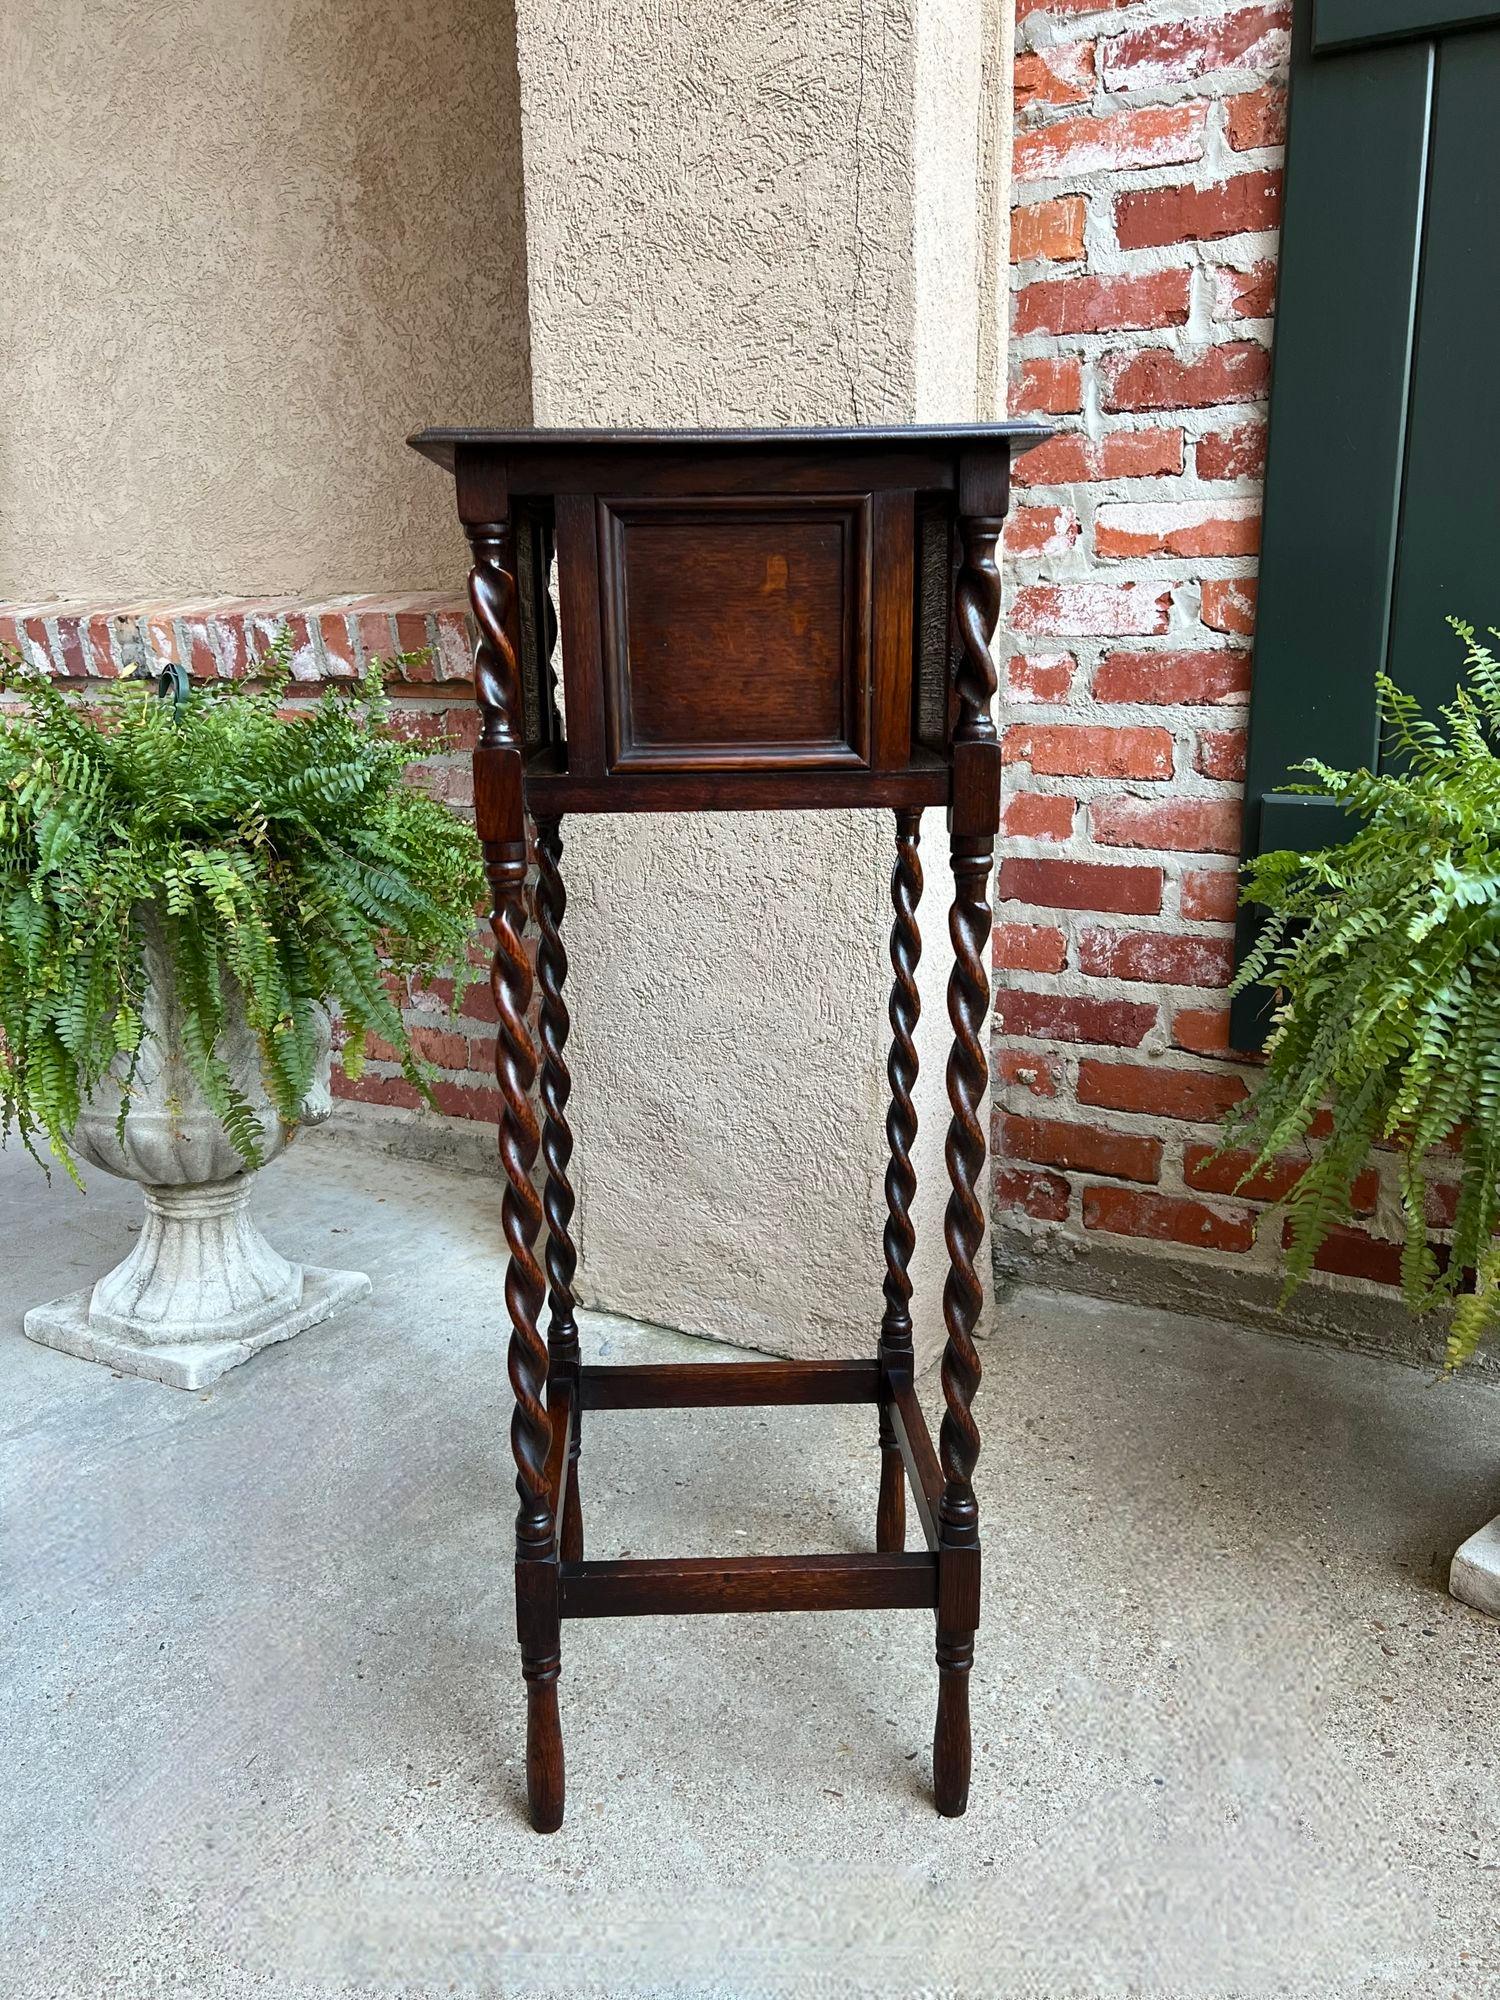 Tall Antique English Barley Twist Plant Stand Square Display Table Tiger Oak.

Direct from England, a very tall and beautiful antique English display stand, perfect for everything from plants to bronze statues!!
The intriguing design features an